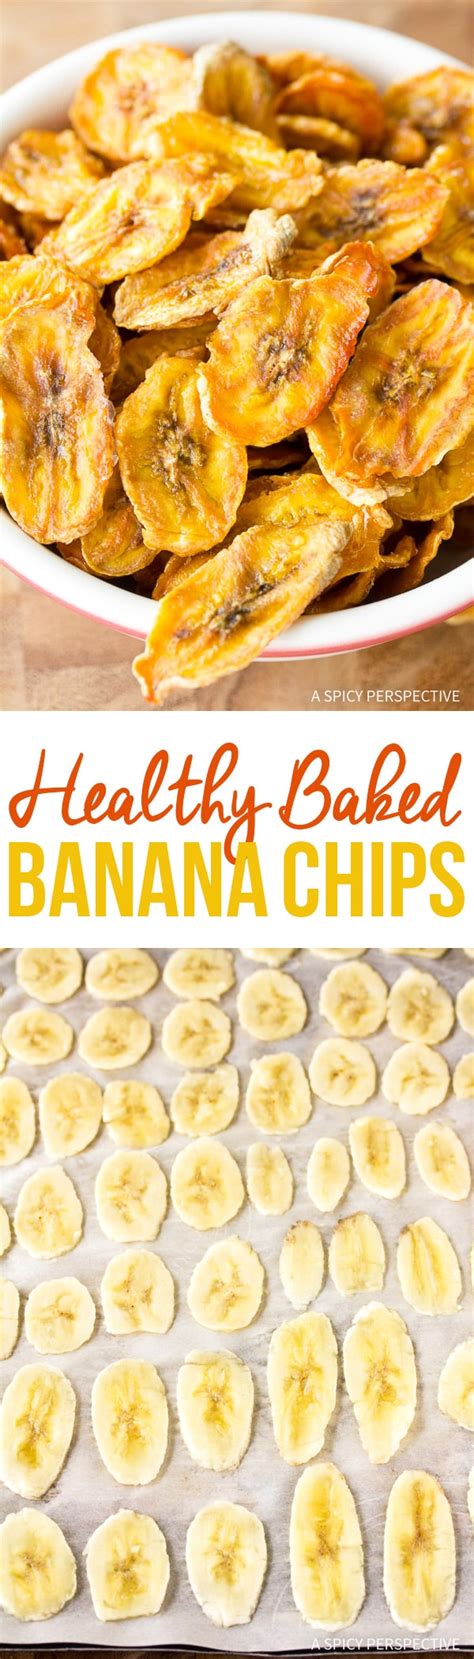 Healthy Baked Banana Chips A Spicy Perspective